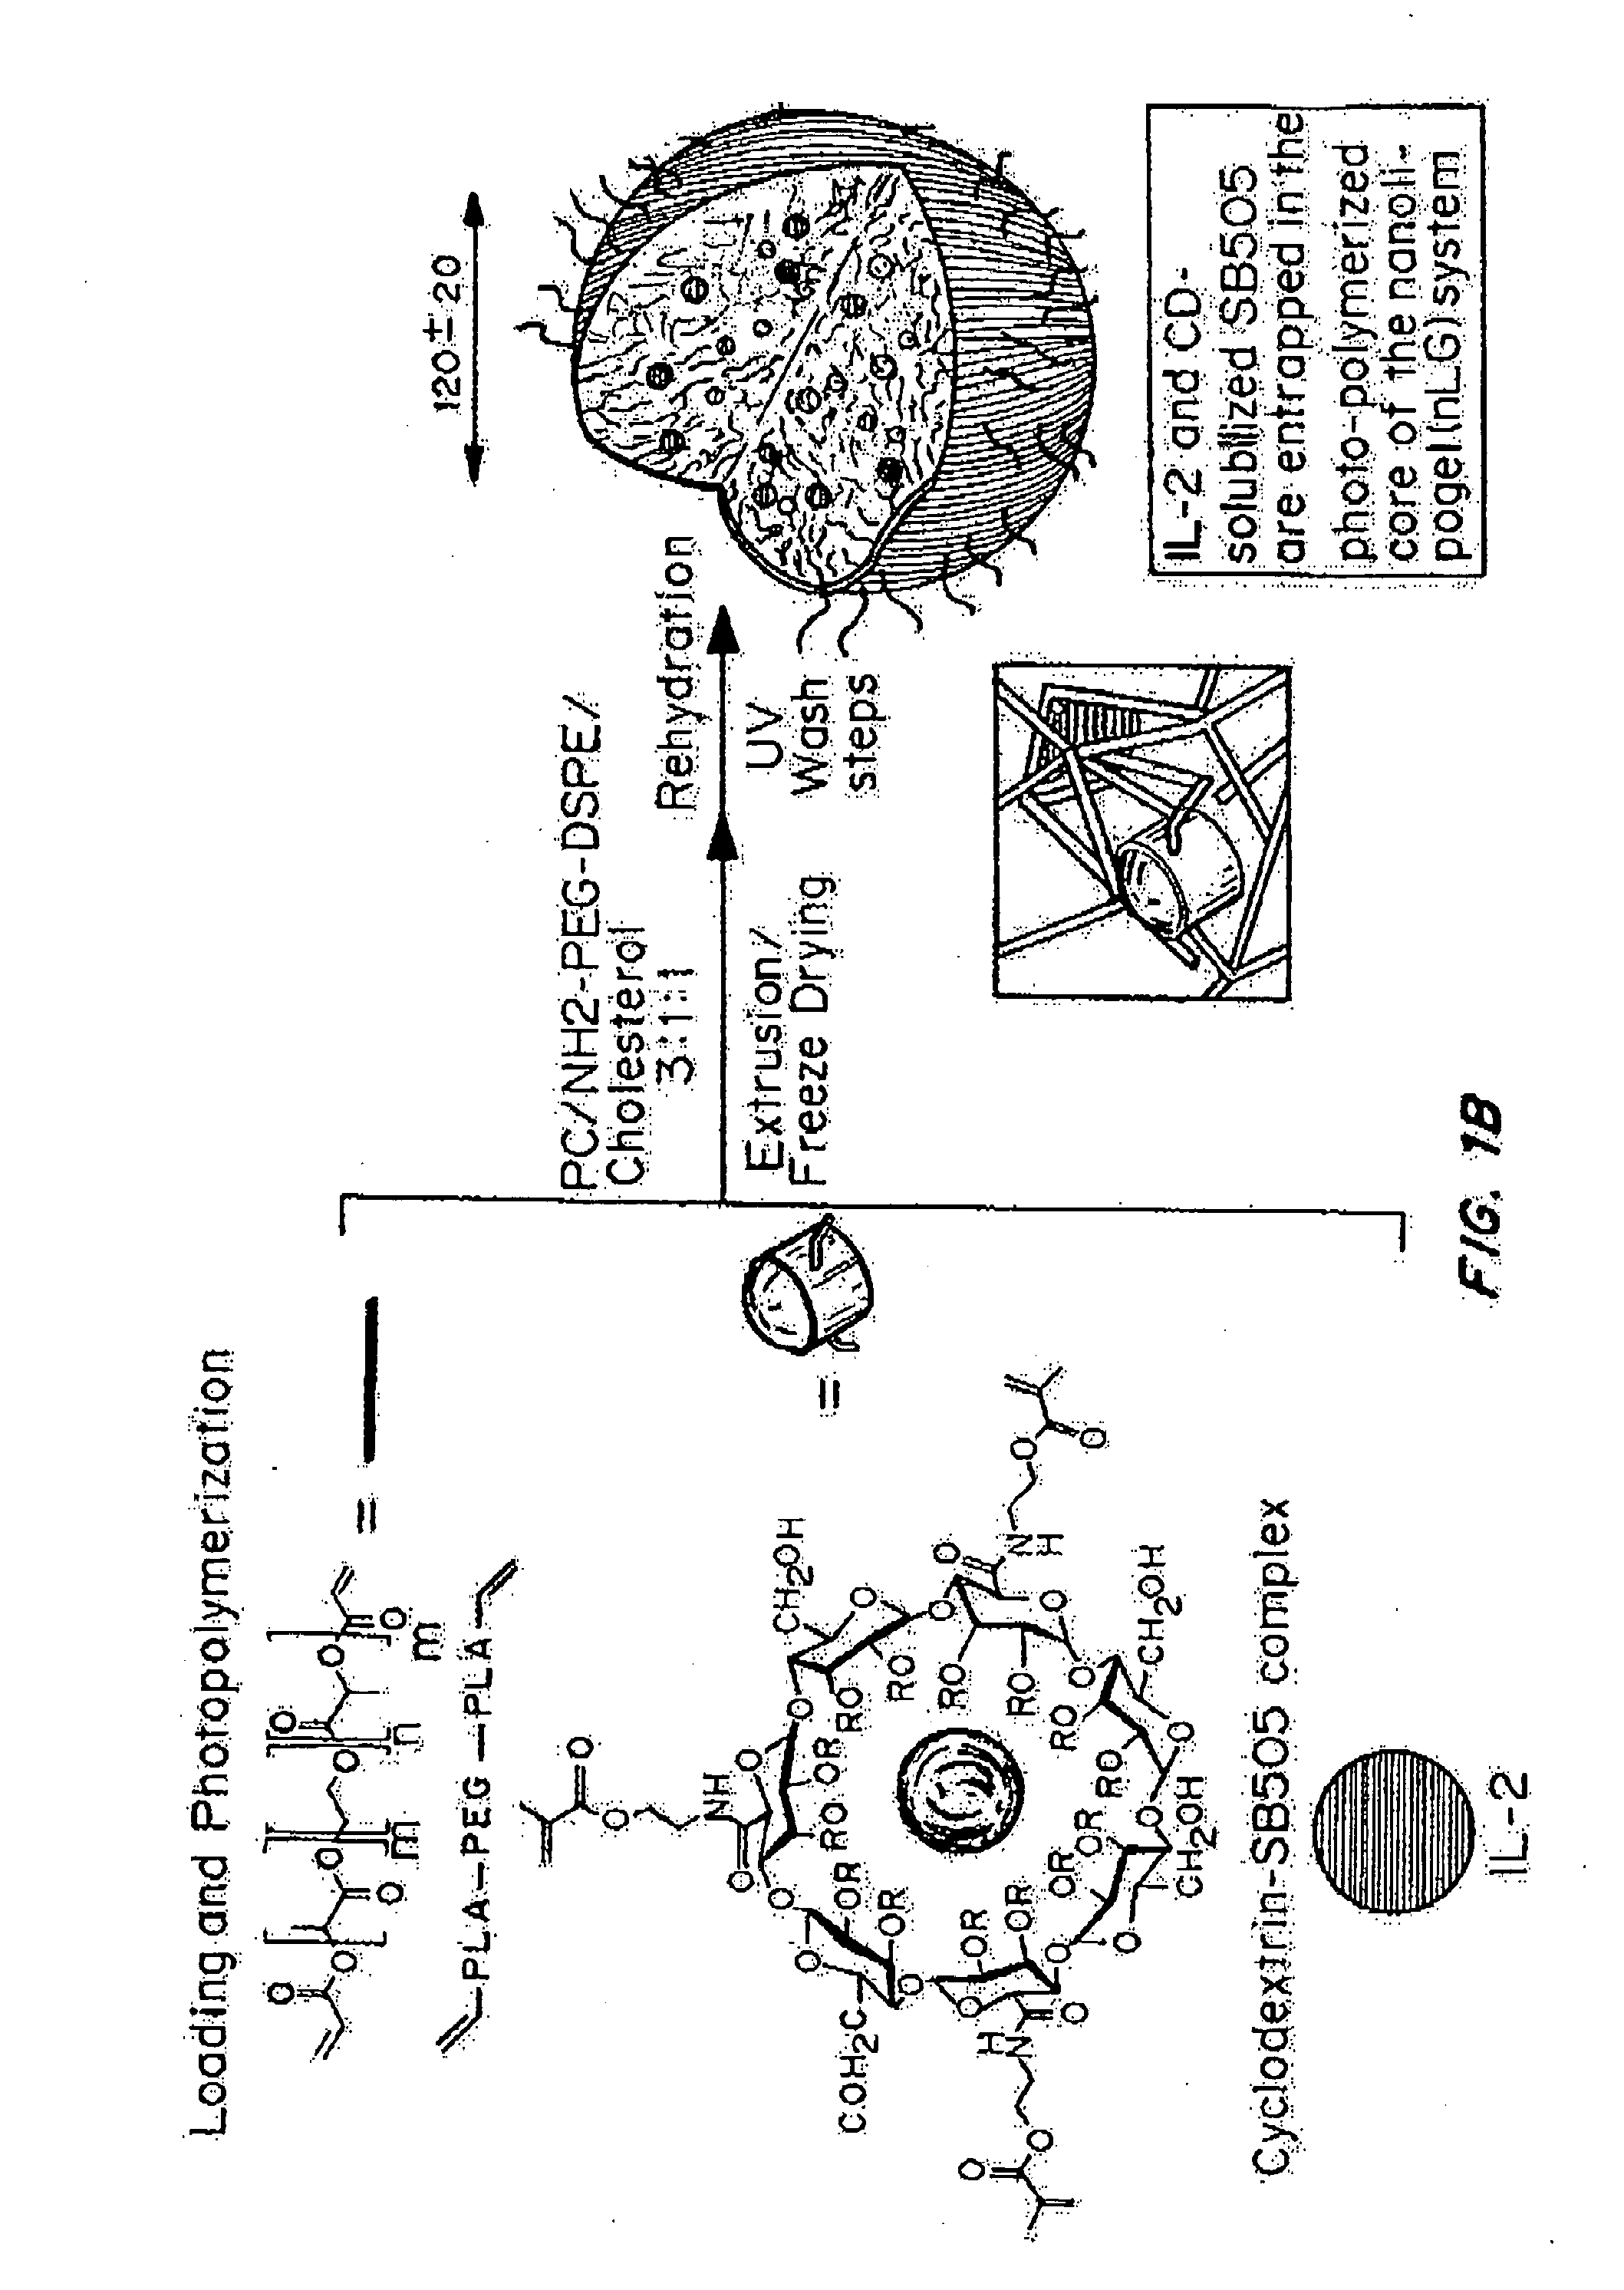 Methods of Treating Inflammatory and Autoimmune Diseases and Disorders